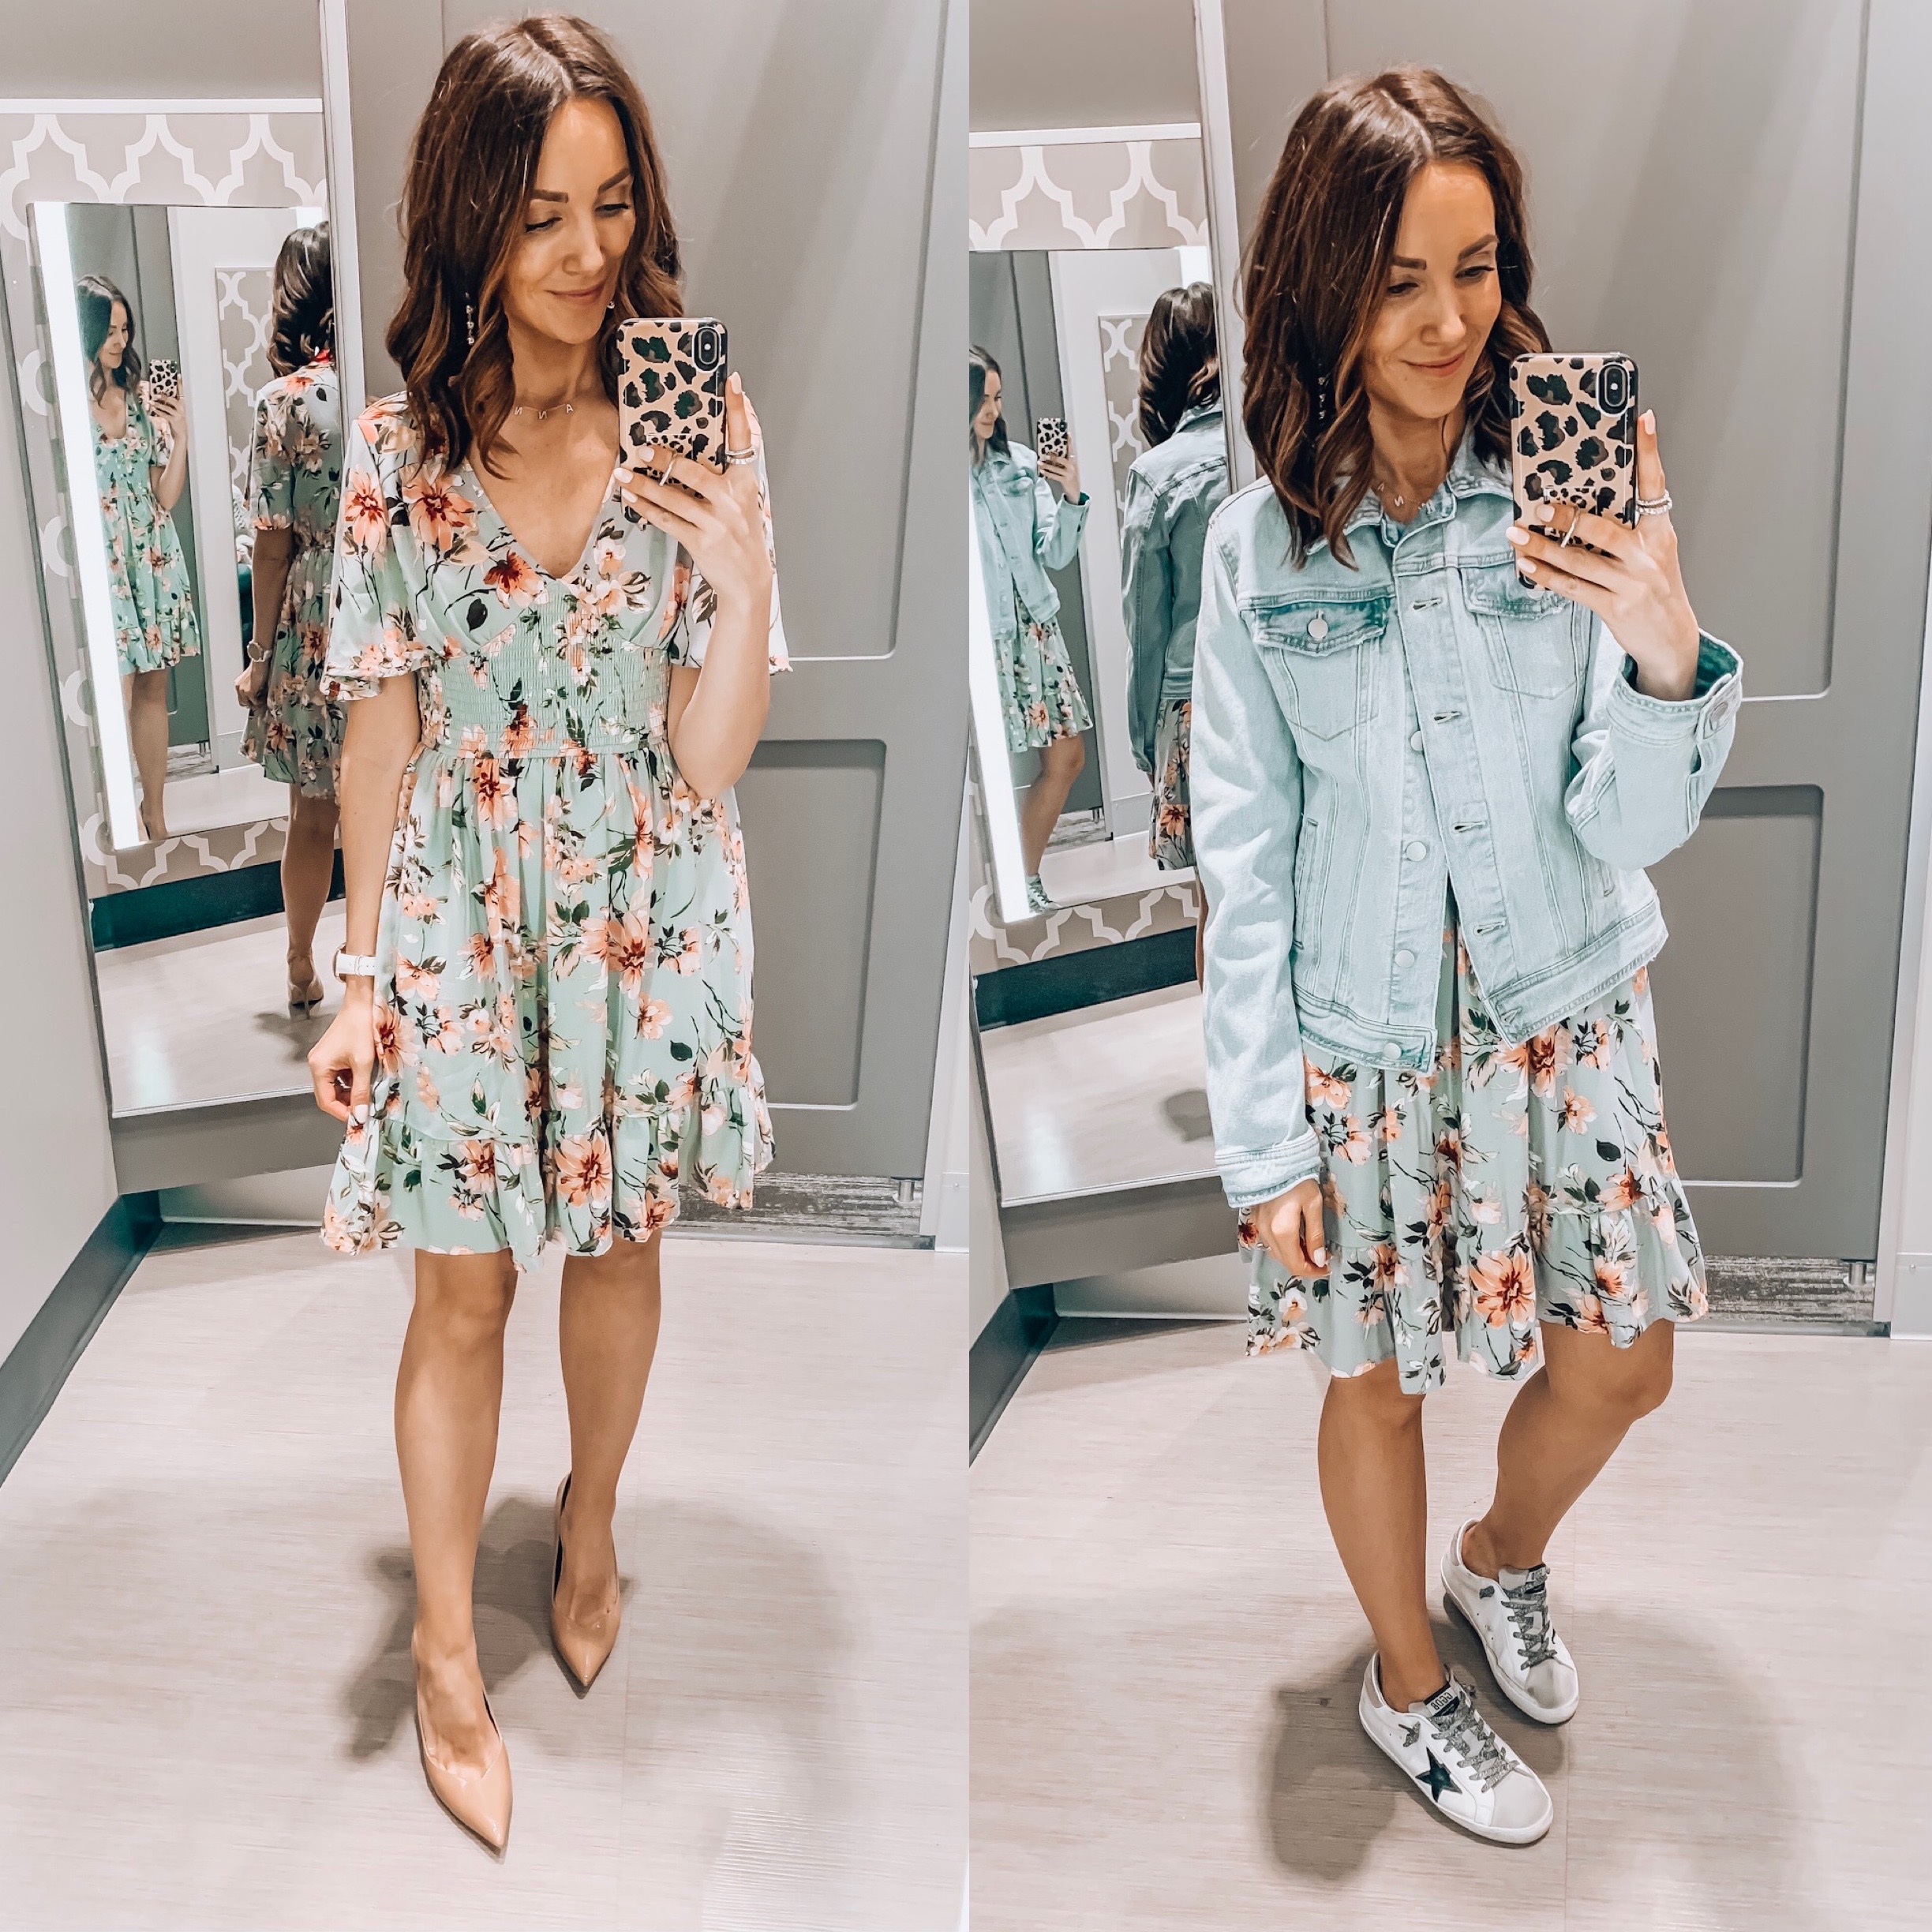 woman wearing floral dress with denim jacket